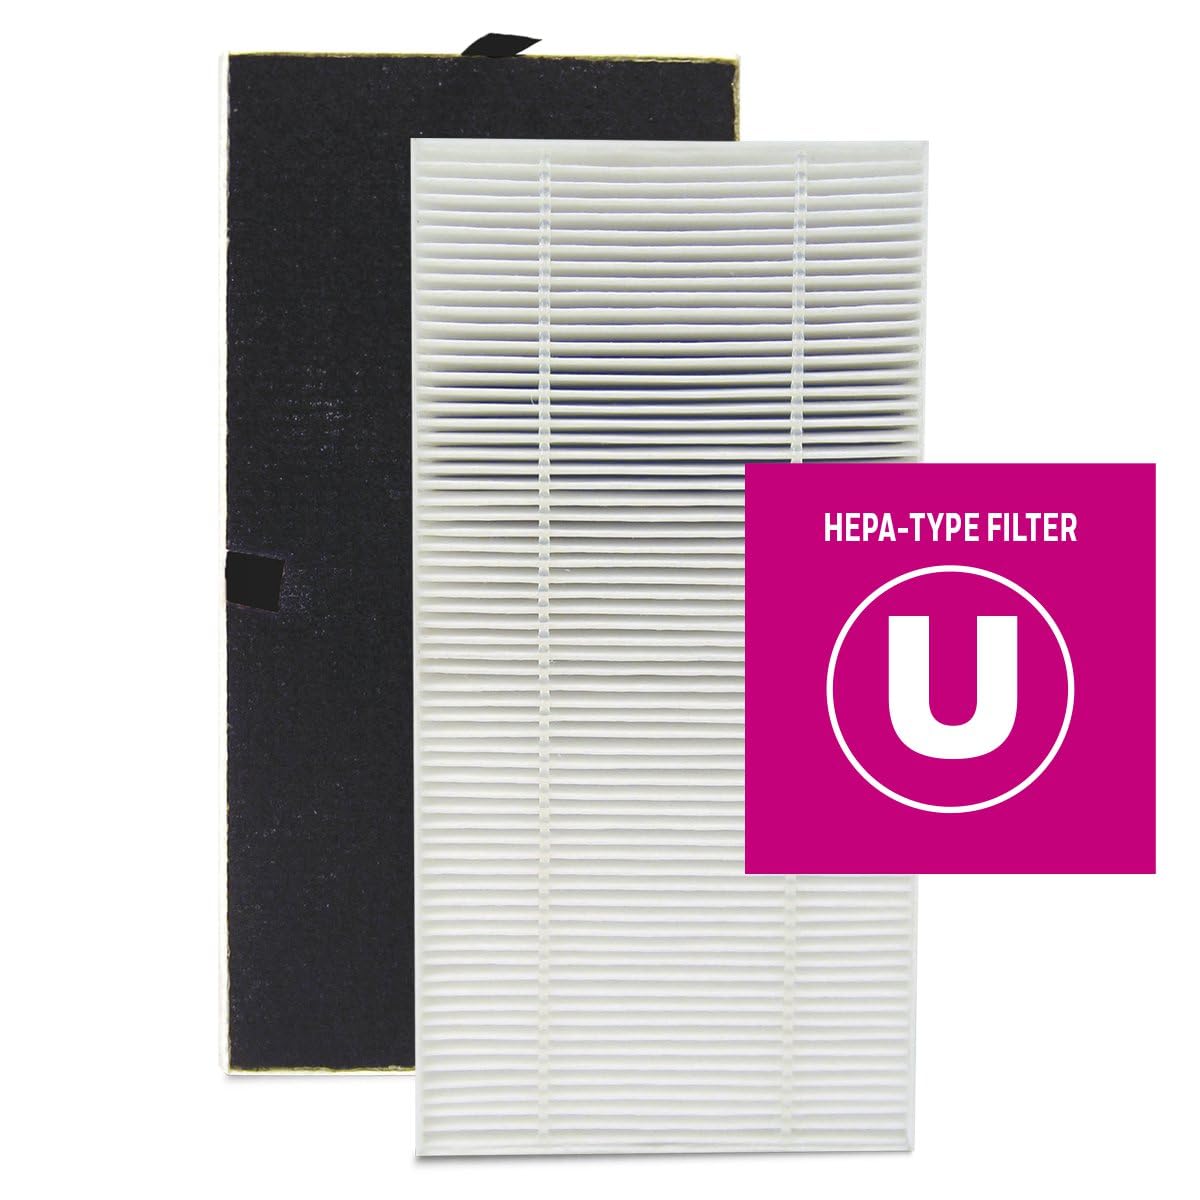 Honeywell HEPA-Type Air Purifier Filter, U – for HHT270 and HHT290 Series